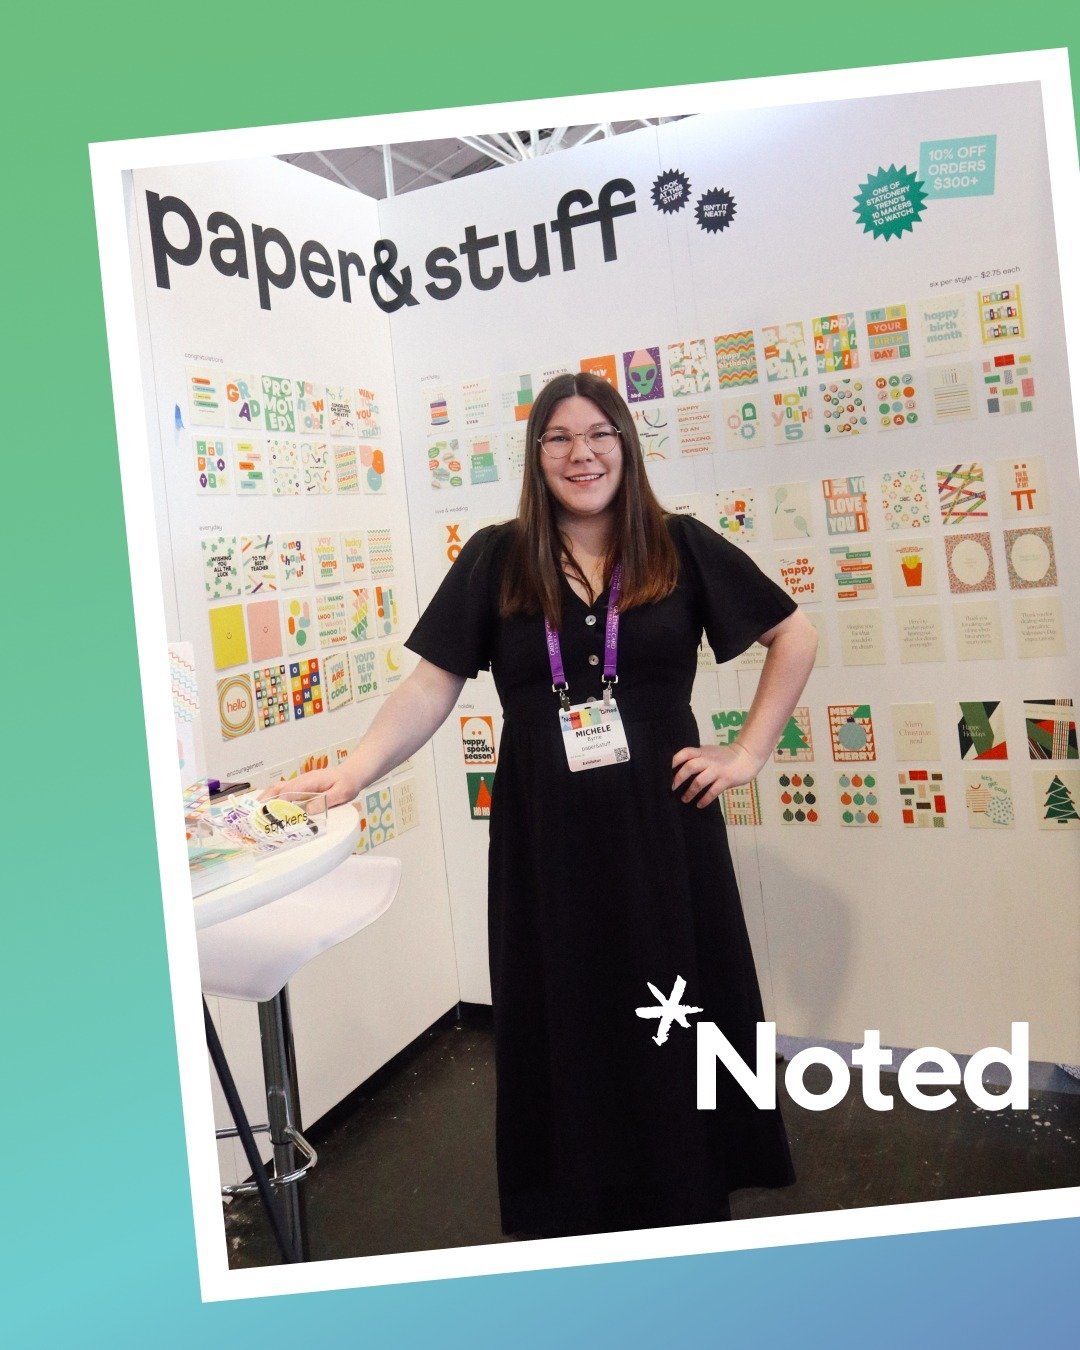 Just got back from an amazing trip to San Francisco where I exhibited at the Noted/Gifted greeting card and gift trade show. It was an incredible experience that really let me dive deep into the industry and chat with experts and buyers. I got to sho